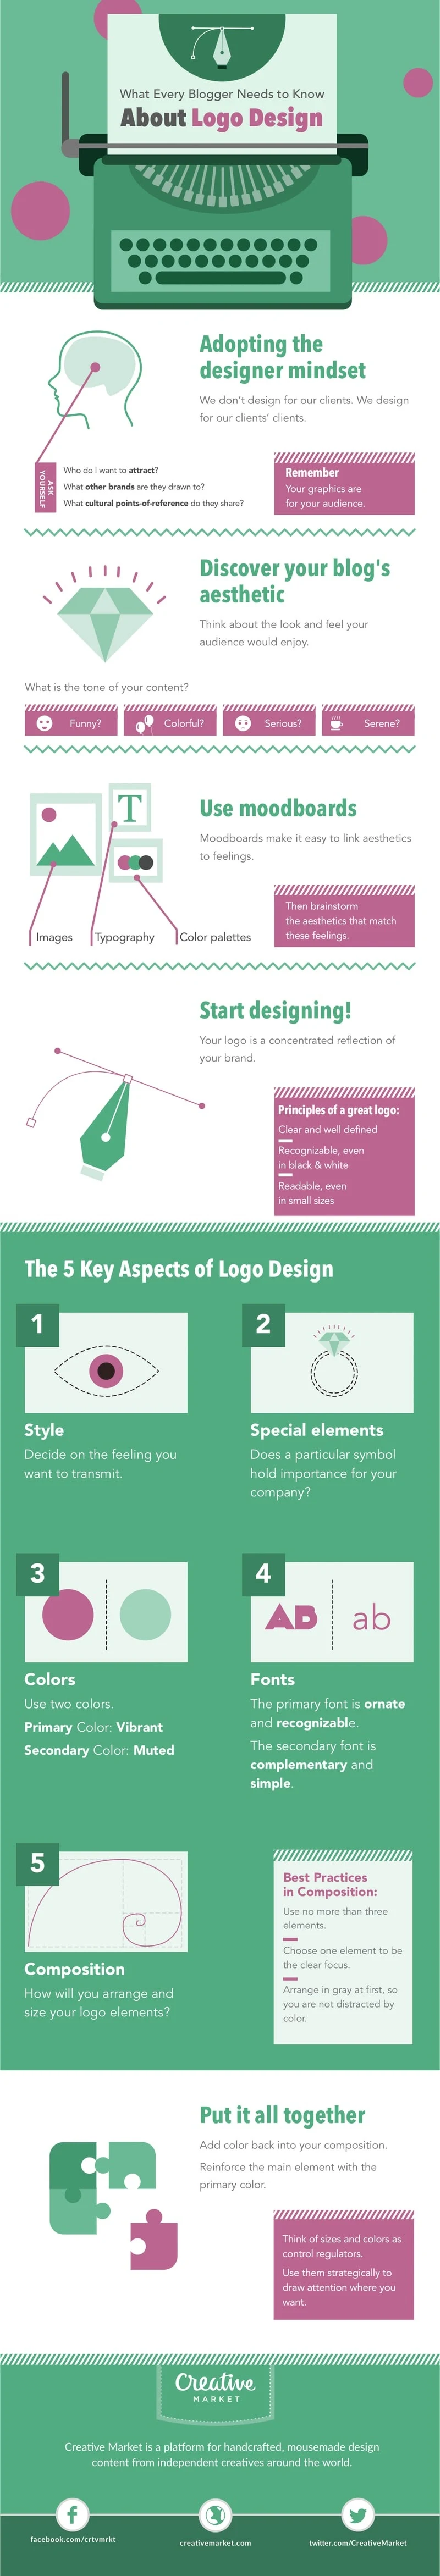 What Every Blogger Needs to Know About Logo Design - #infographic